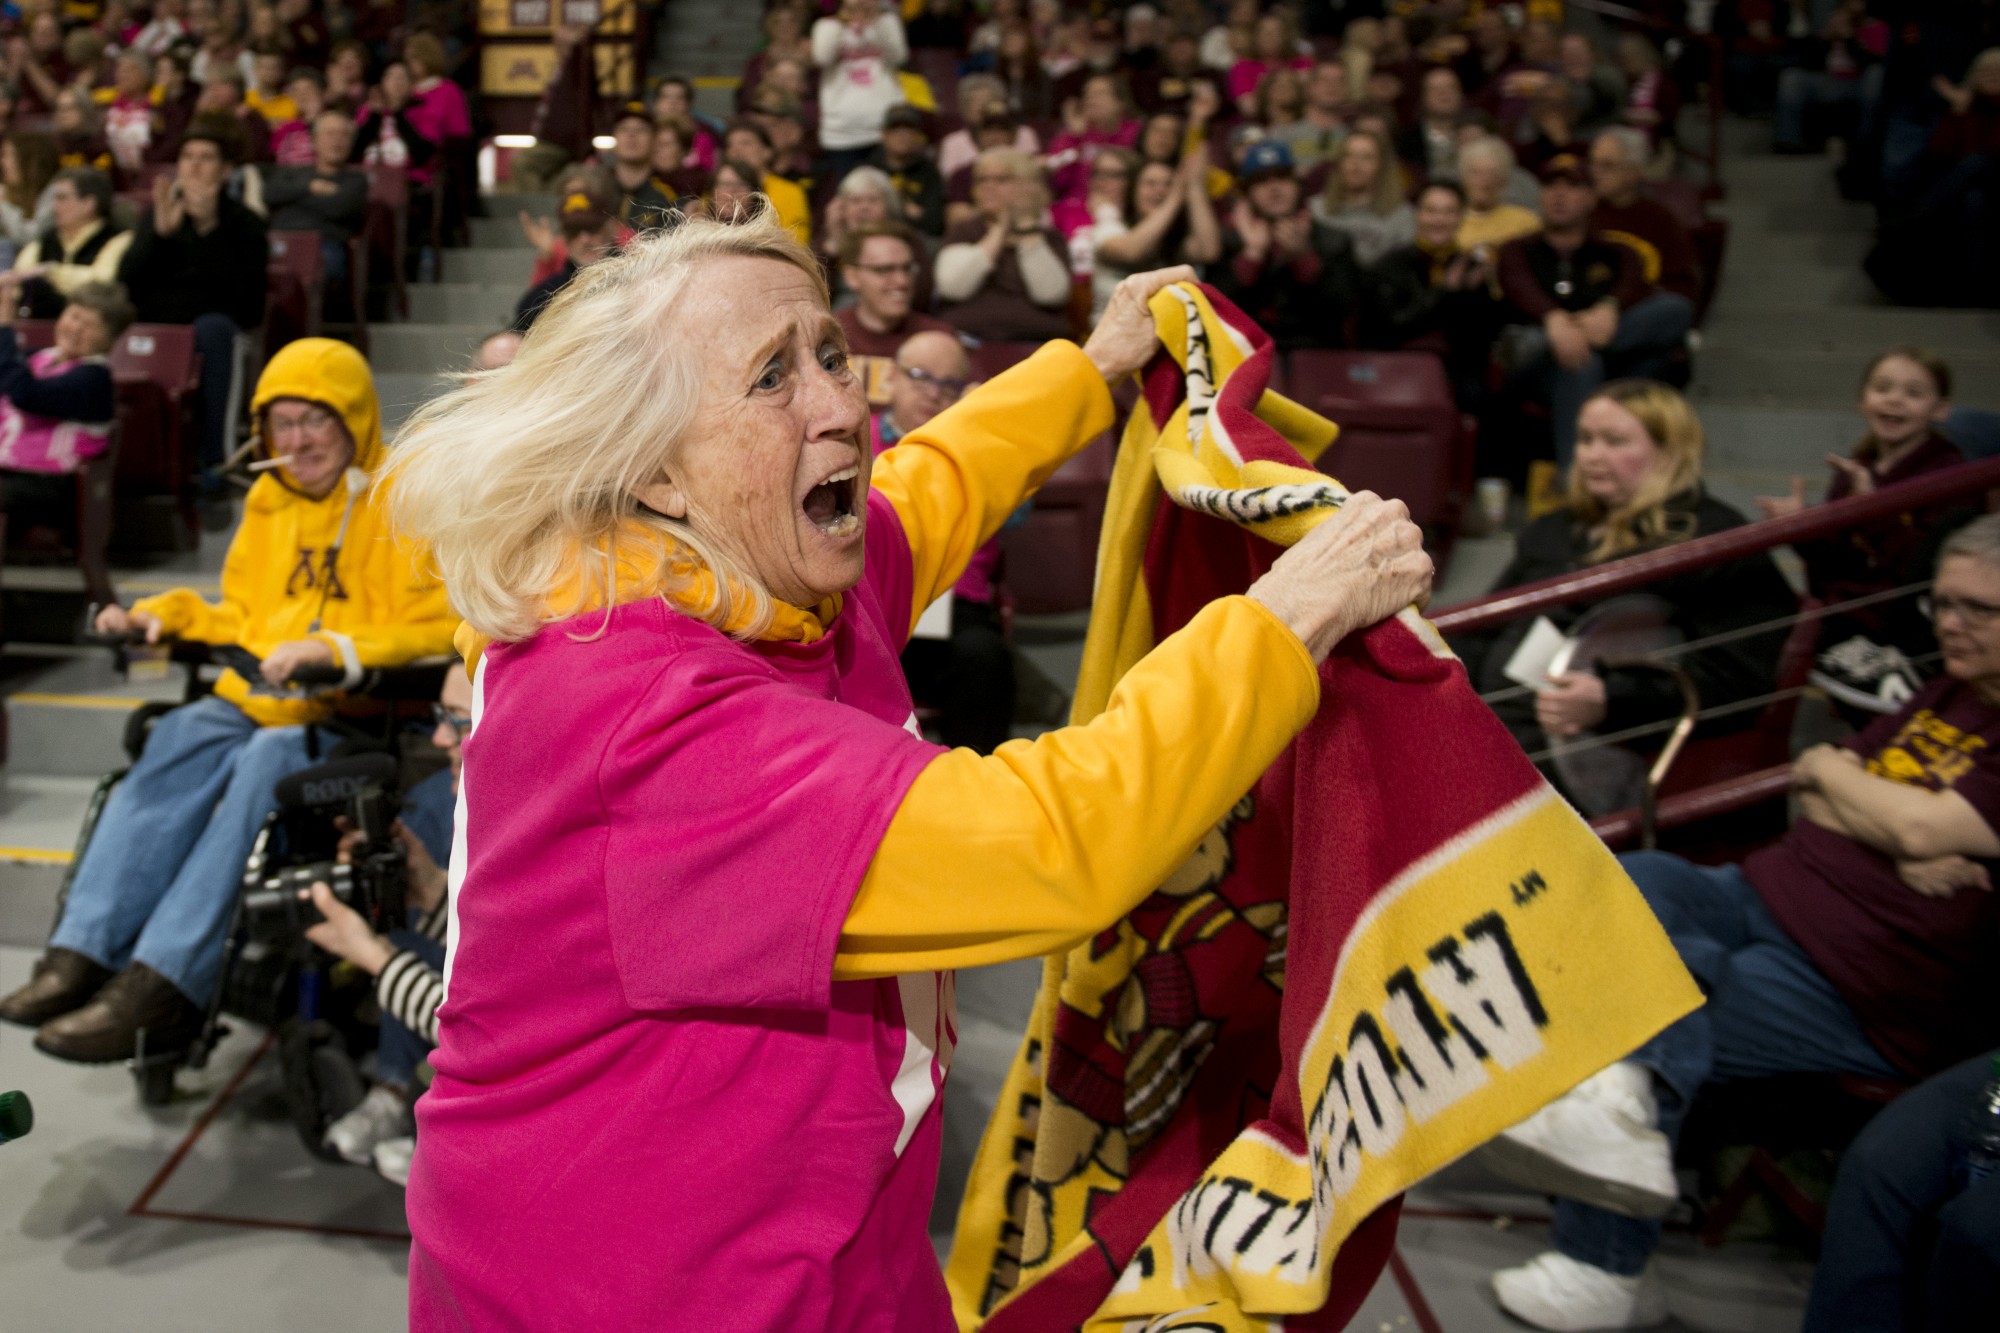 The Blanket Lady makes her rounds across the perimeter of Williams Arena during the Gophers 75-69 loss to Indiana on Saturday, Feb. 22. 